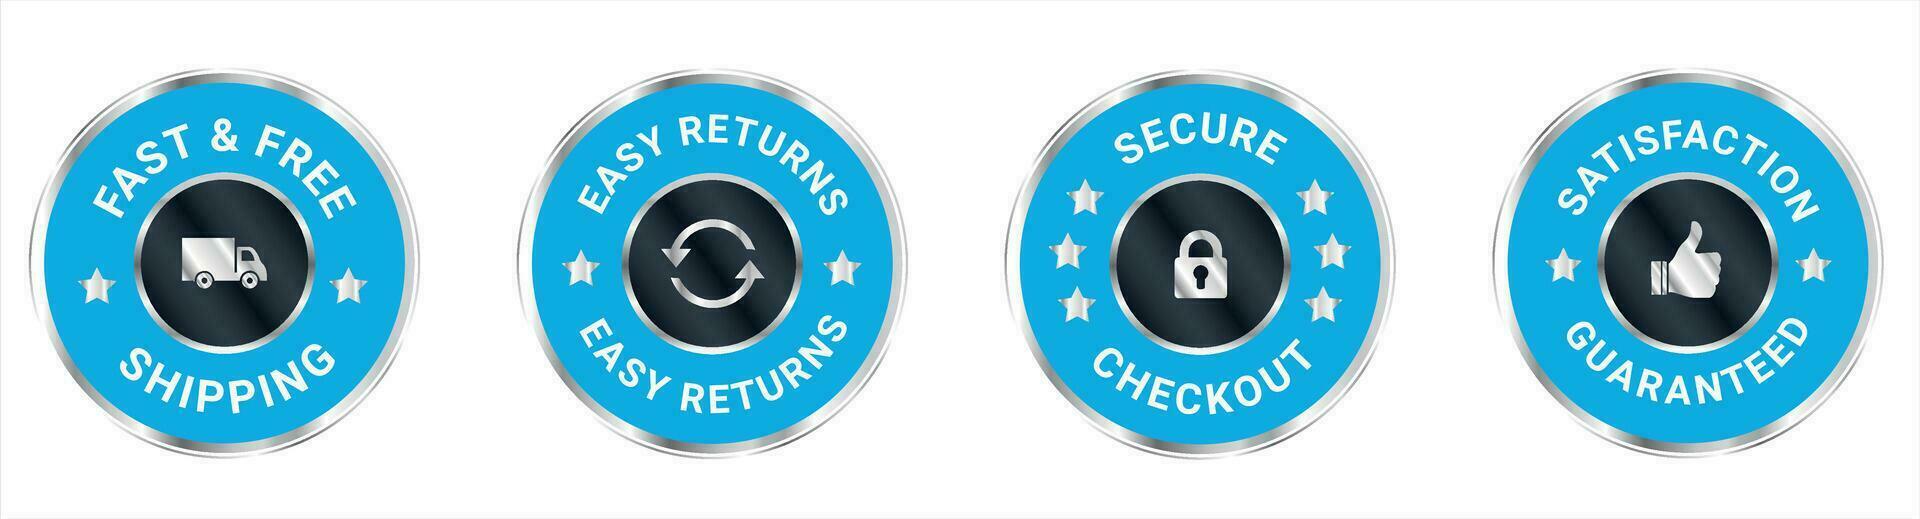 Money back guarantee, Free Shipping Trust Badges ,Trust Badges, secure checkout, easy returns vector